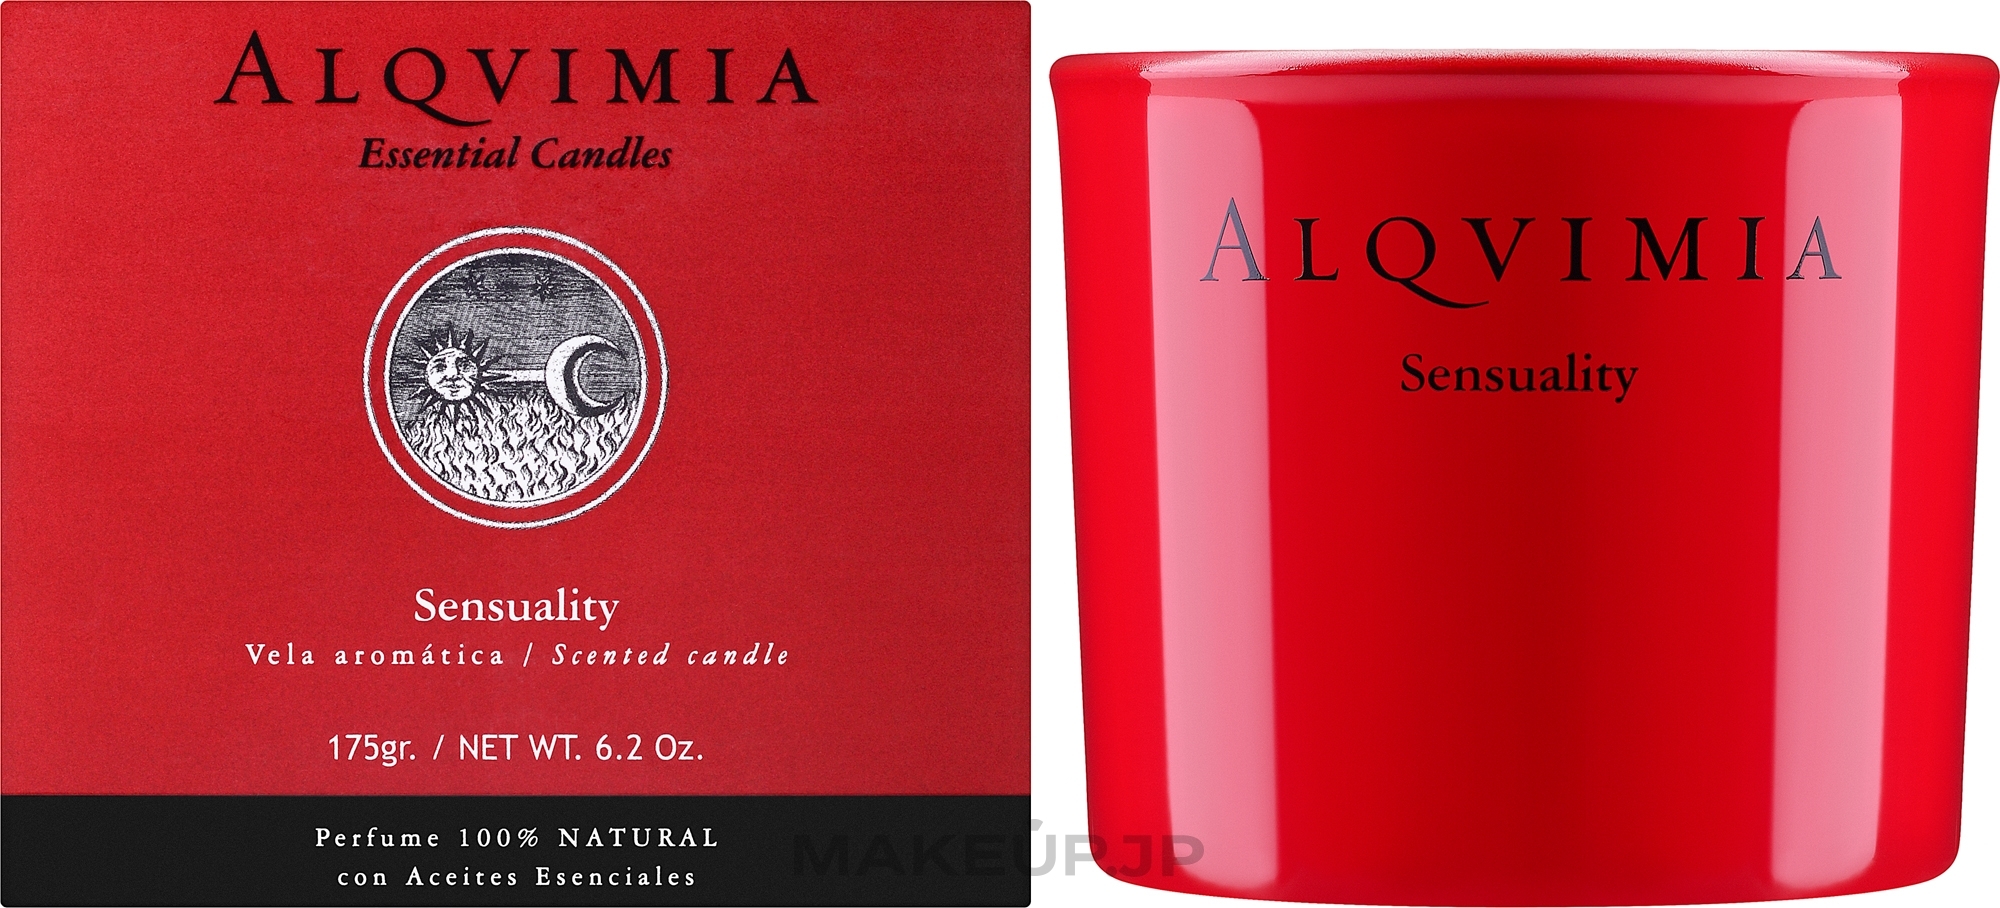 Scented Candle - Alqvimia Sensuality Scented Candle — photo 175 g